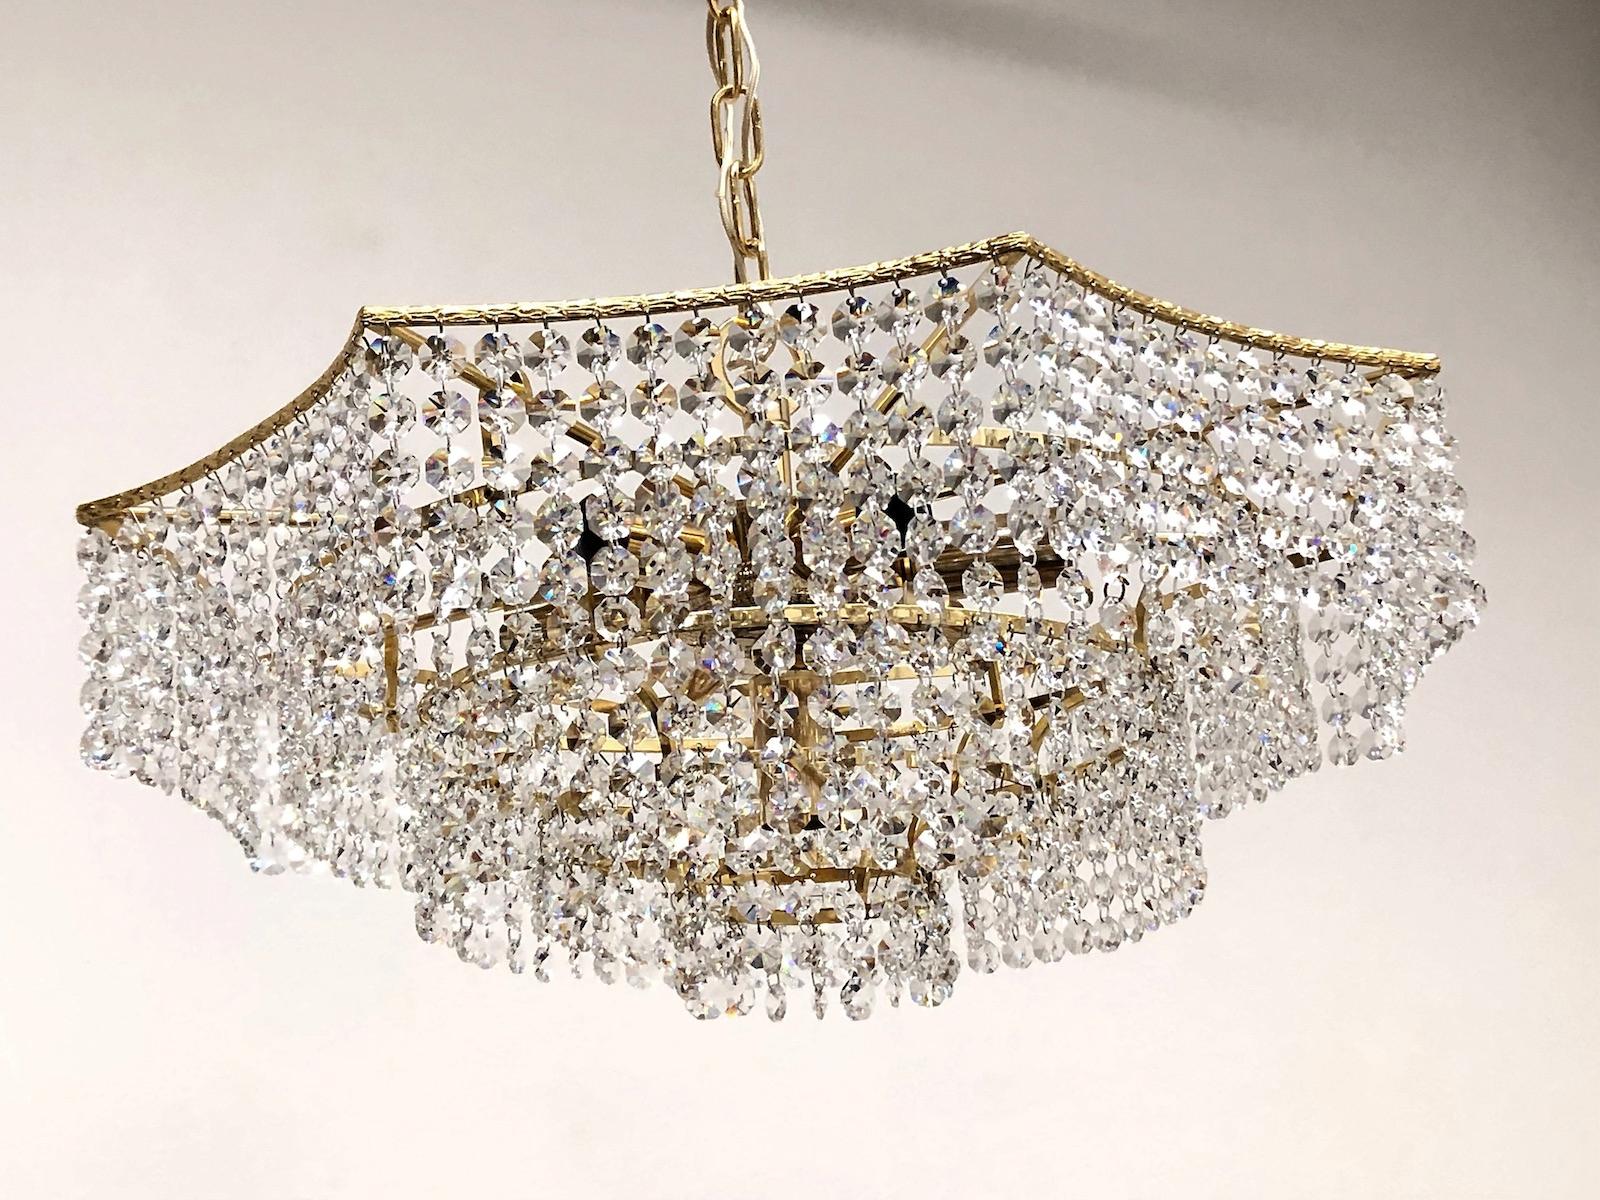 Gold Plate Brass and Crystal Glass Waterfall Chandelier, Richard Essig, Germany, 1960s For Sale